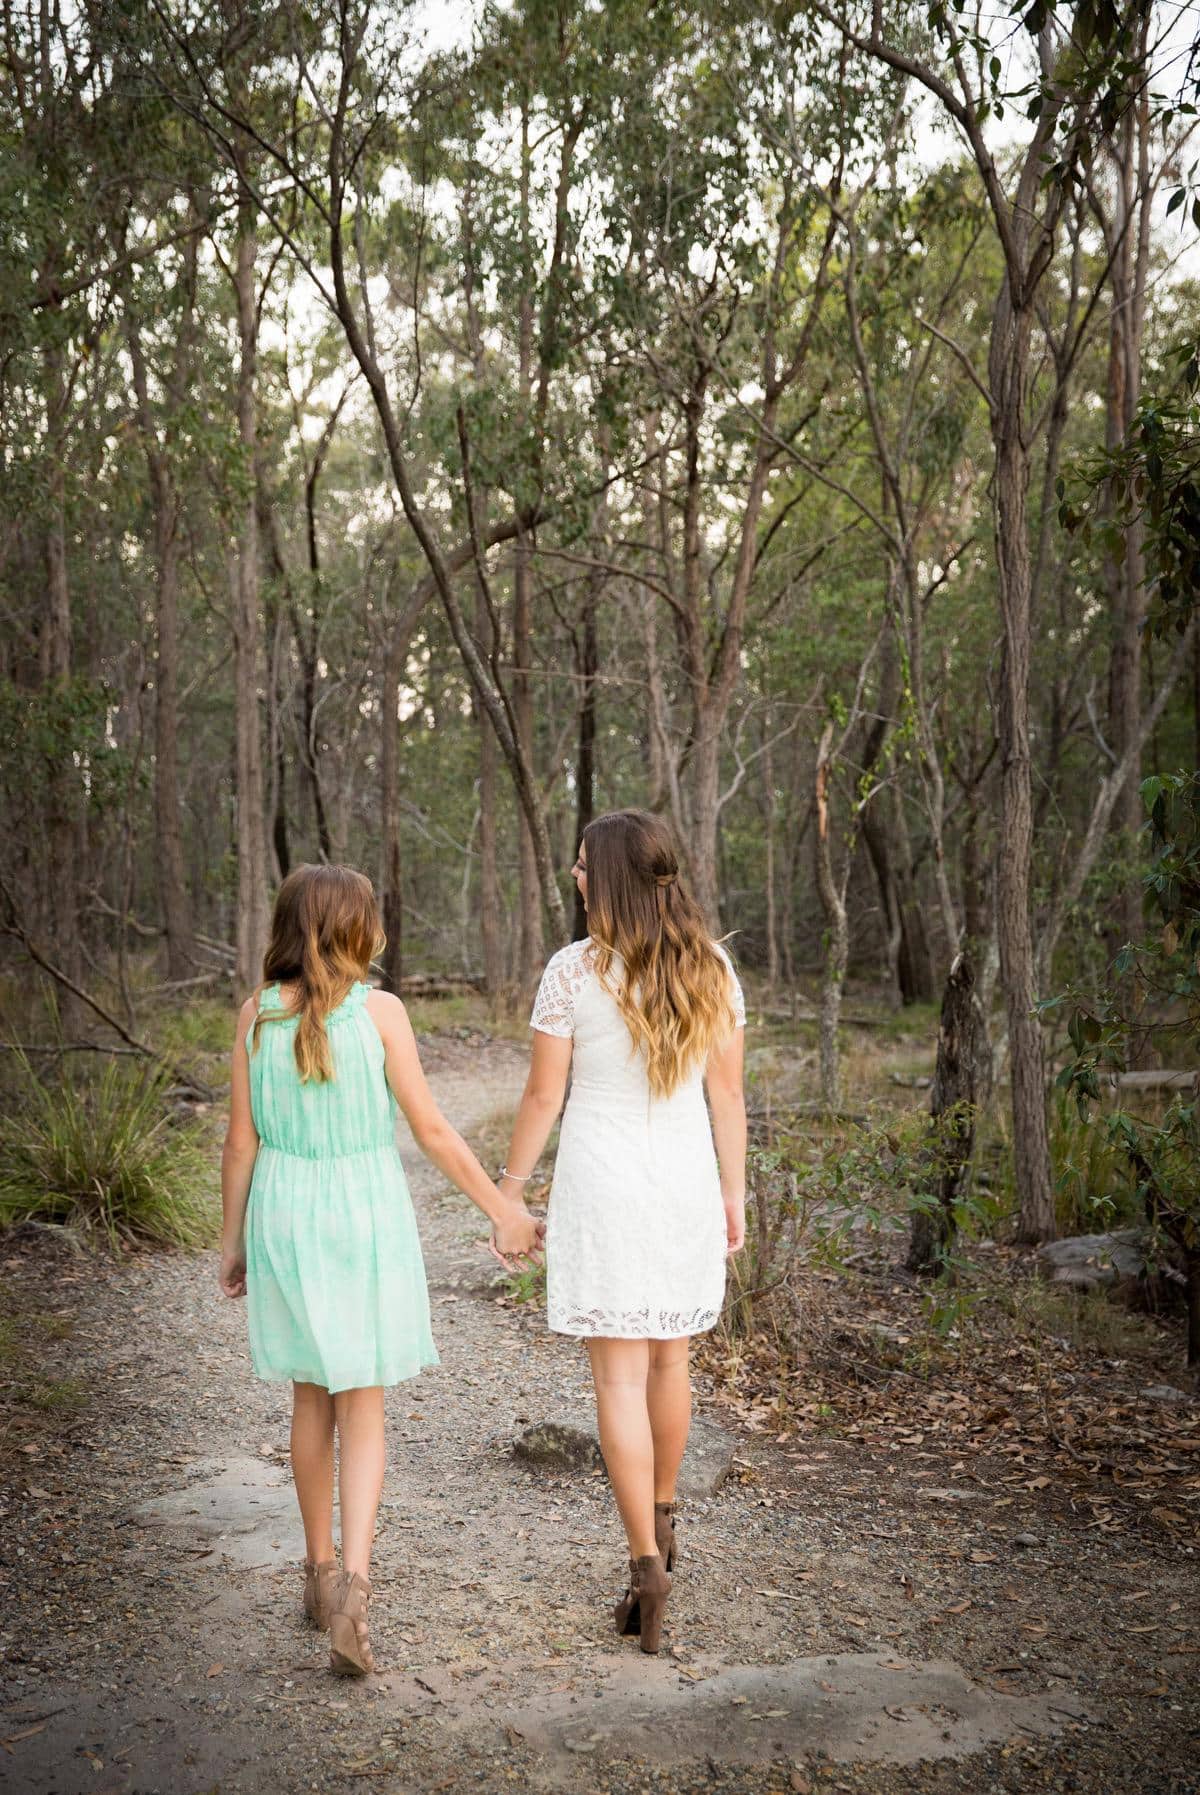 Sisters Photoshoot Field + Forst Photography www.fiendnandforest.com.au